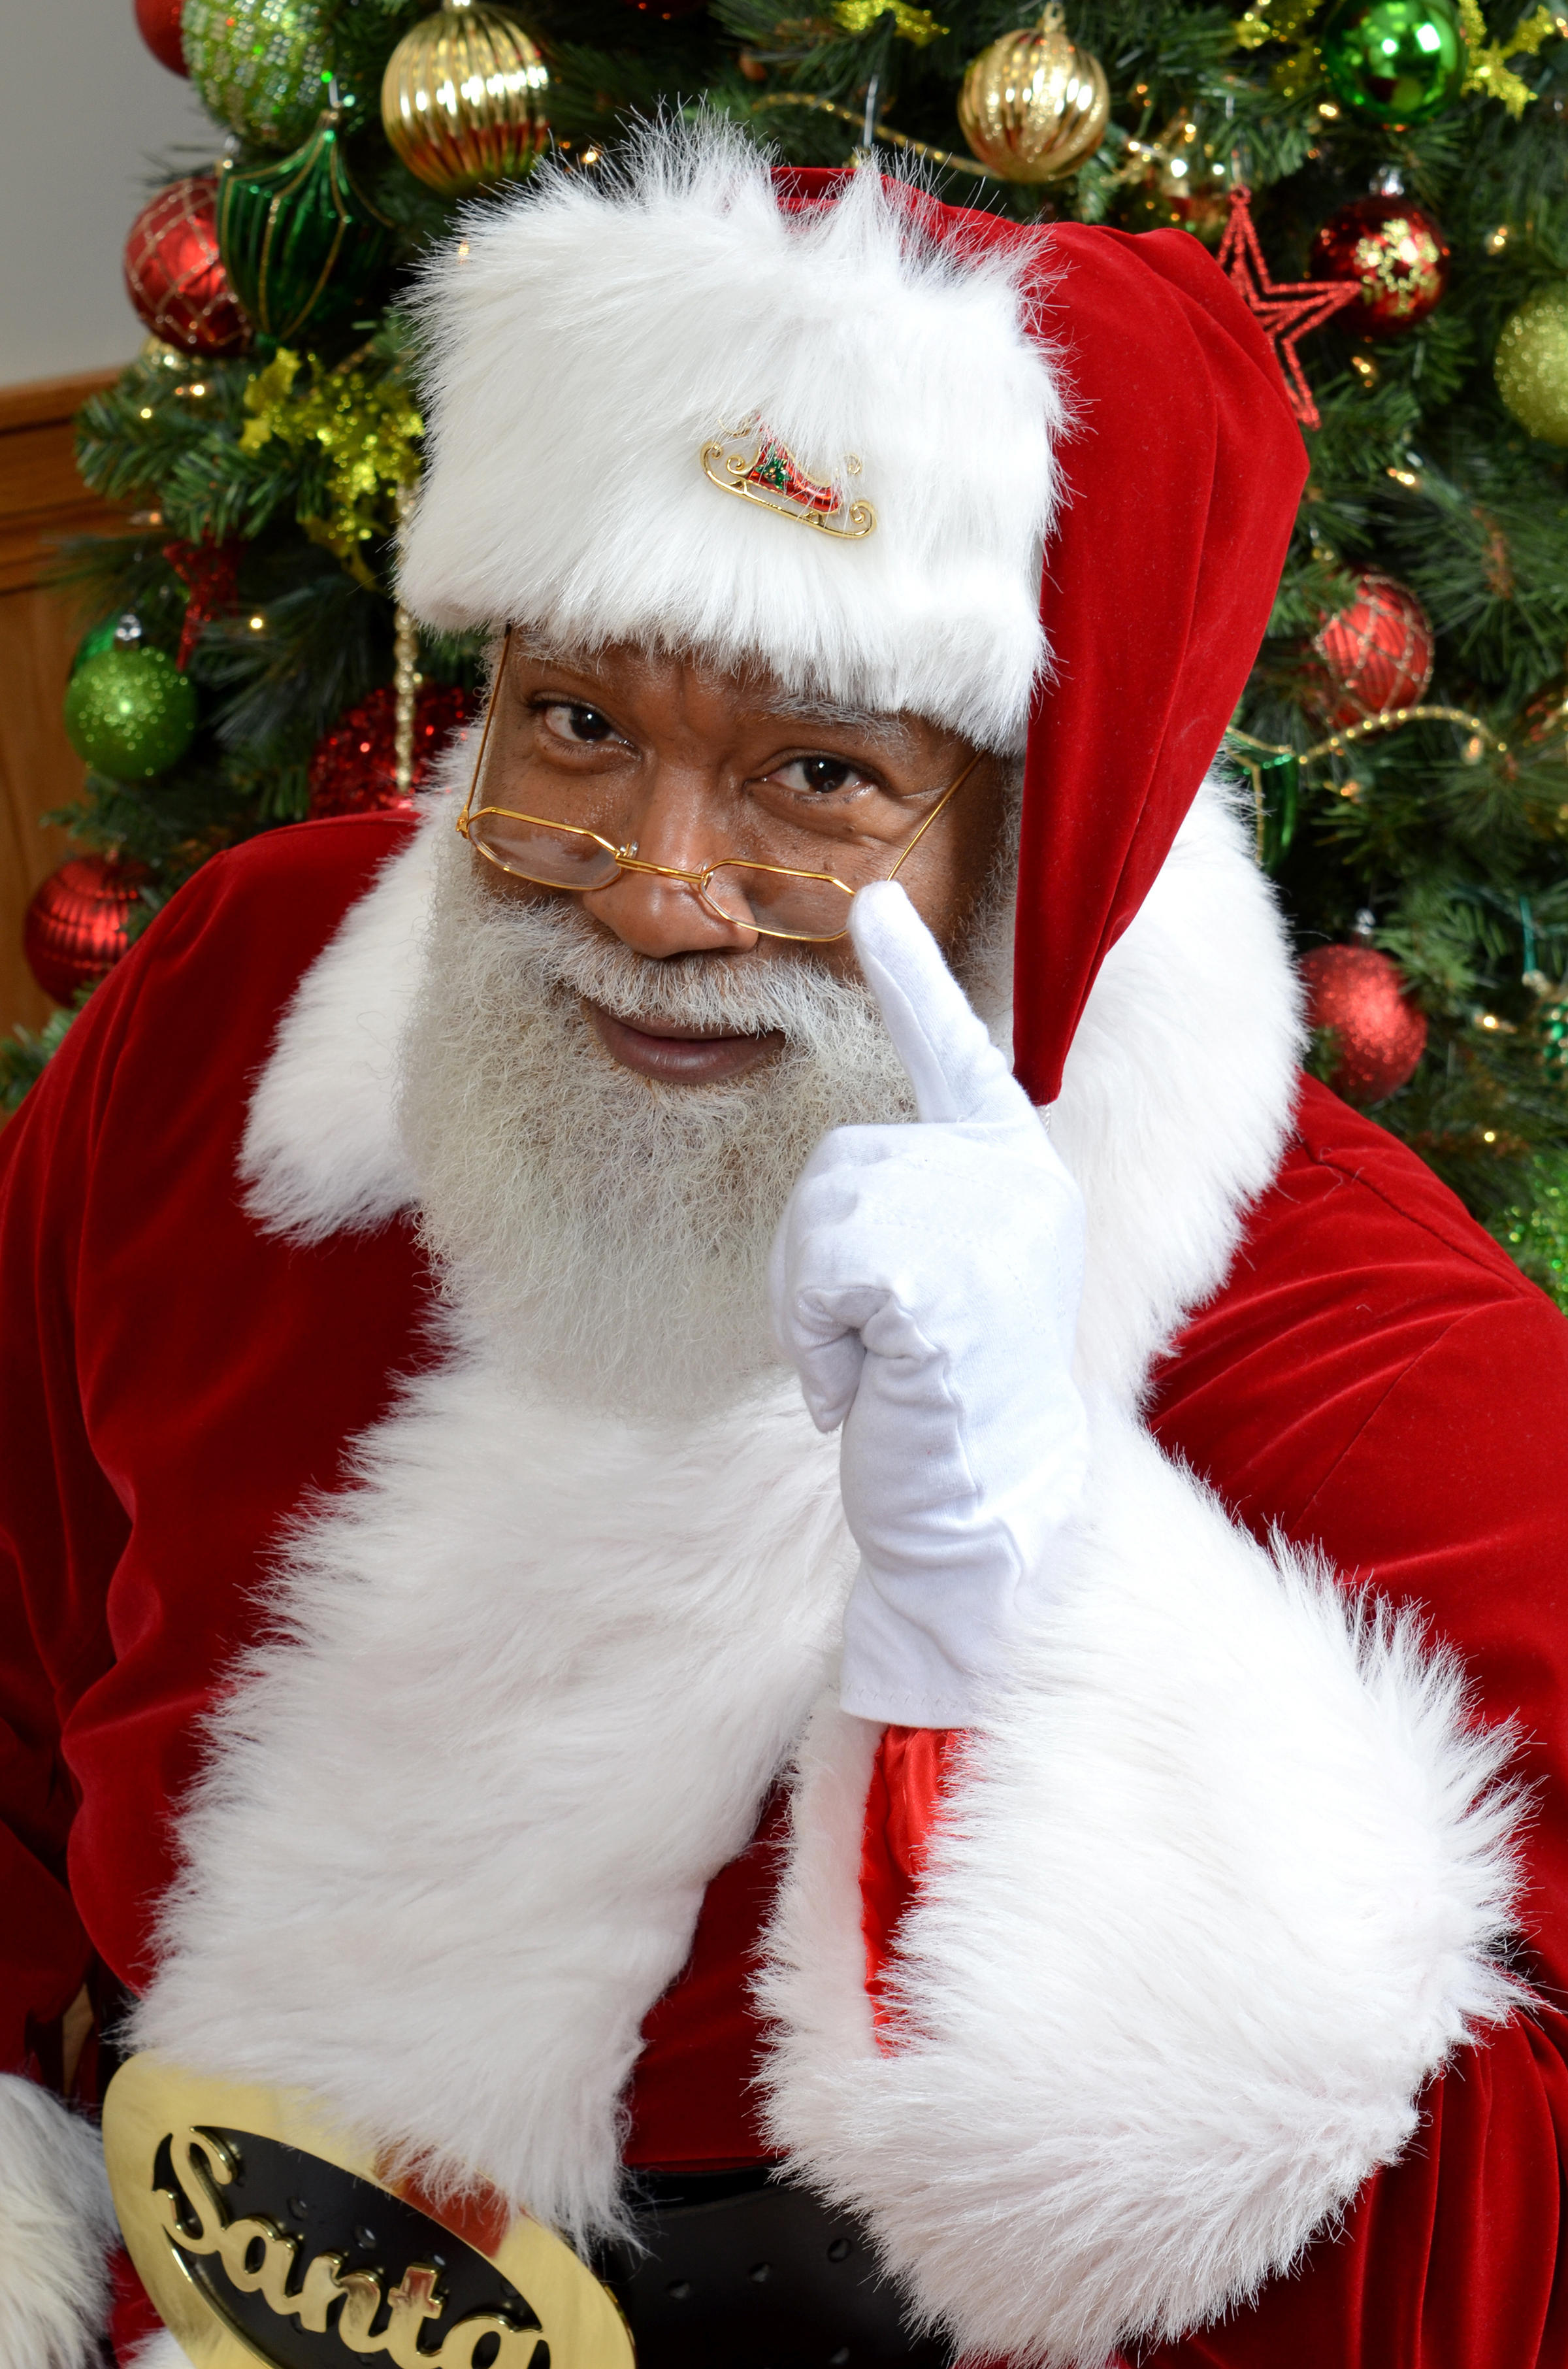 Black Santa Claus Is A Hit At Mall Of America, But Faces An Online ...